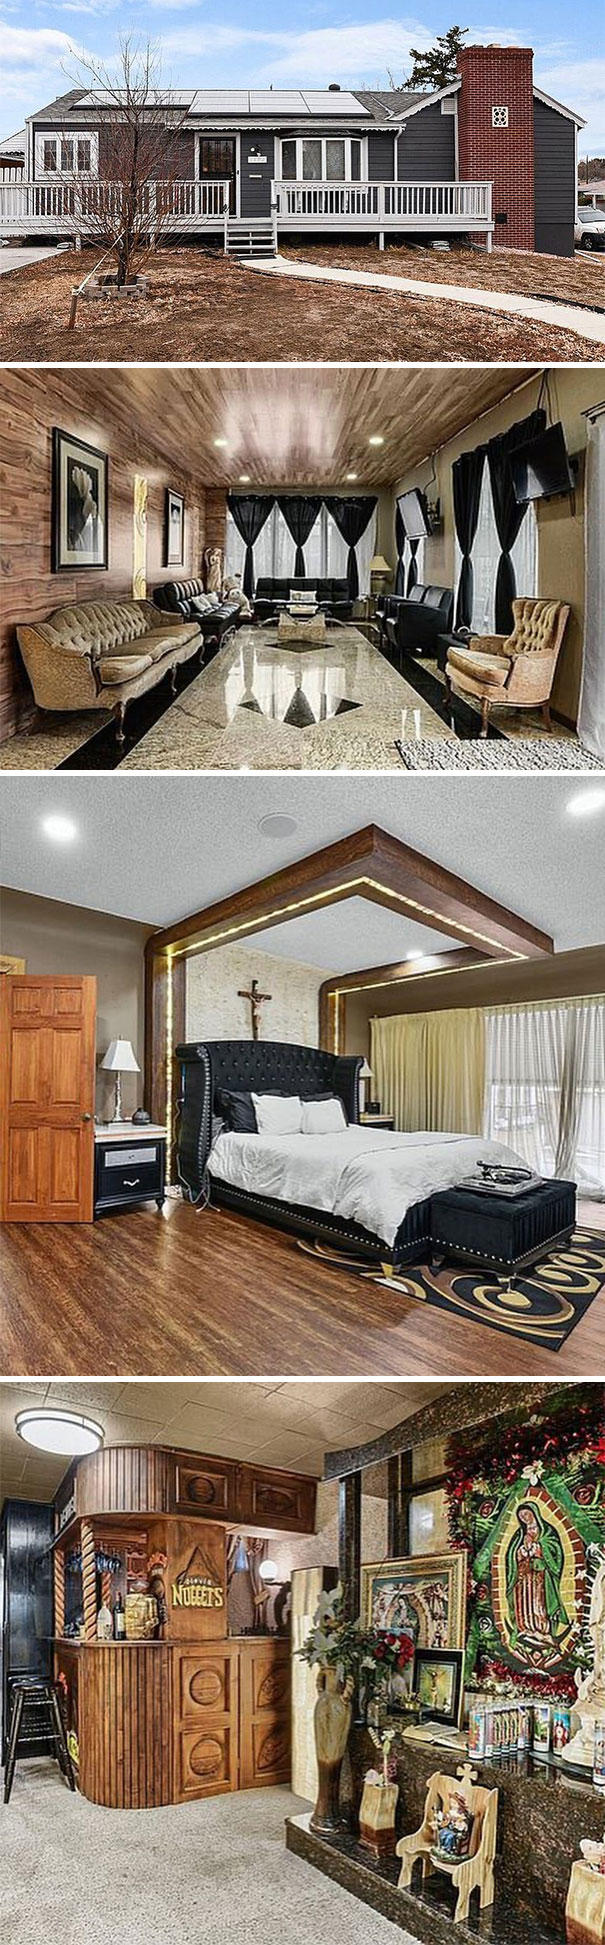 I Have No Idea What’s Happening In This $650,000 Denver, Co Home But I Respect It